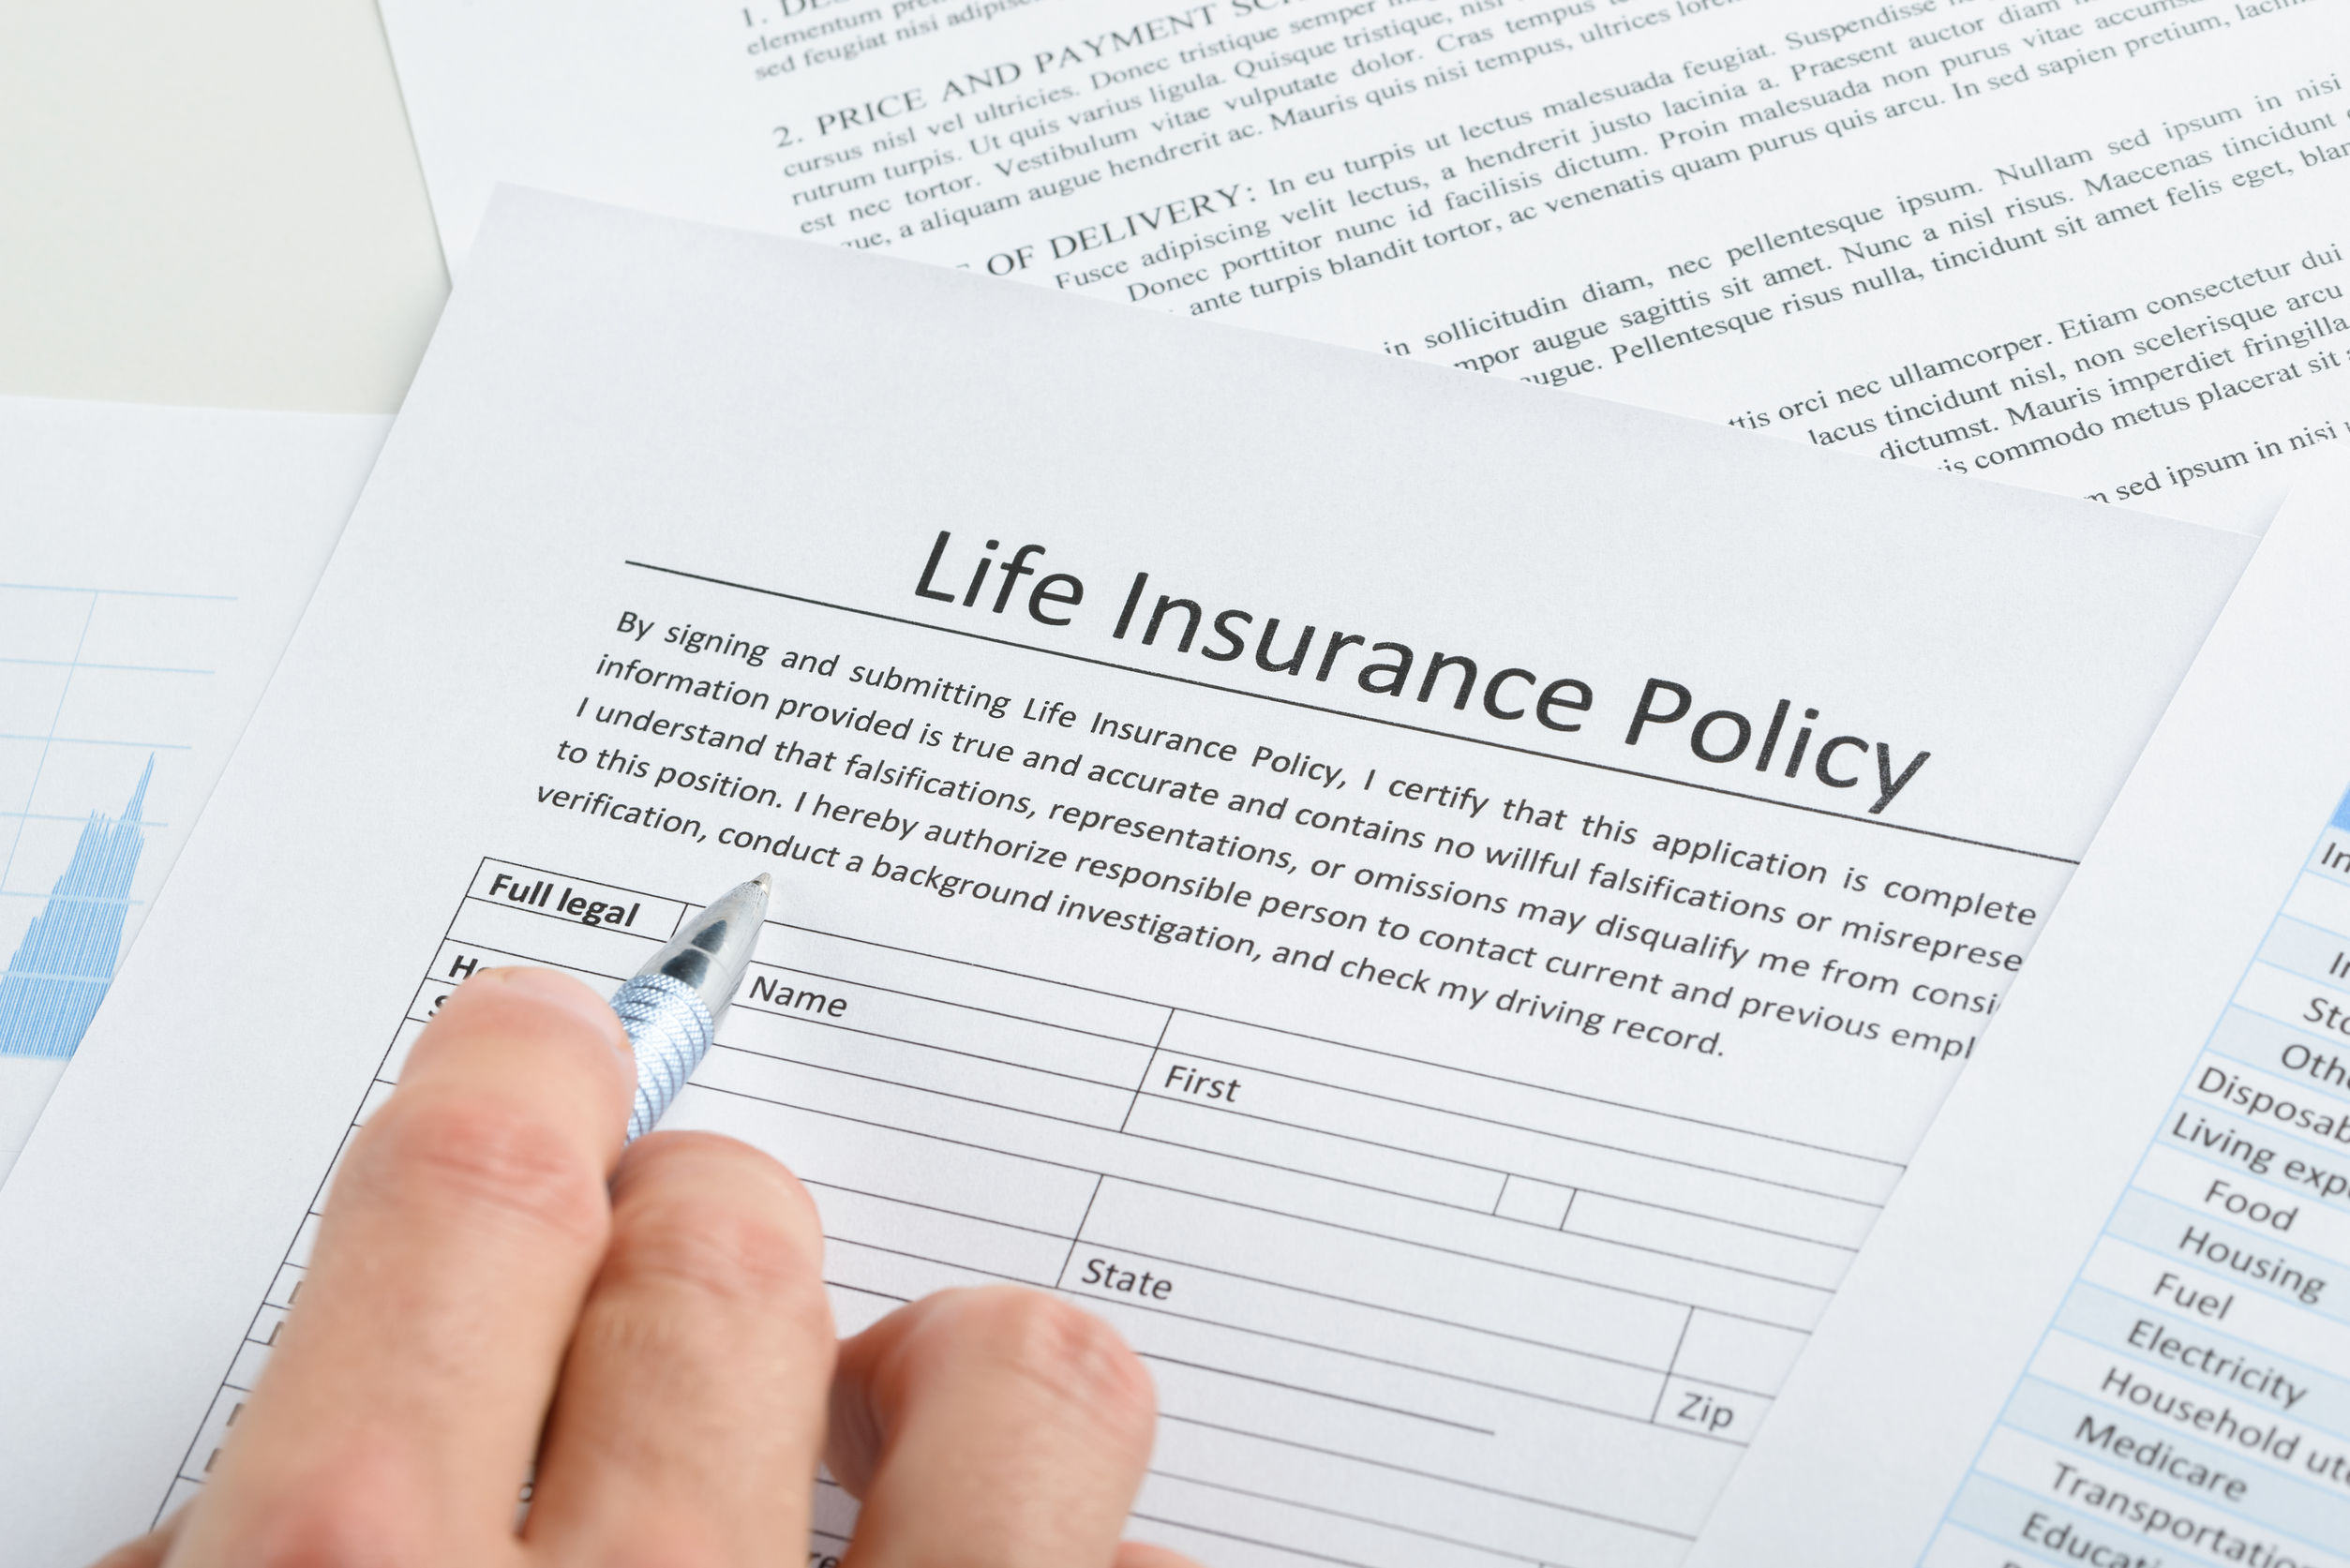 close-up of person hand filling life insurance policy application form